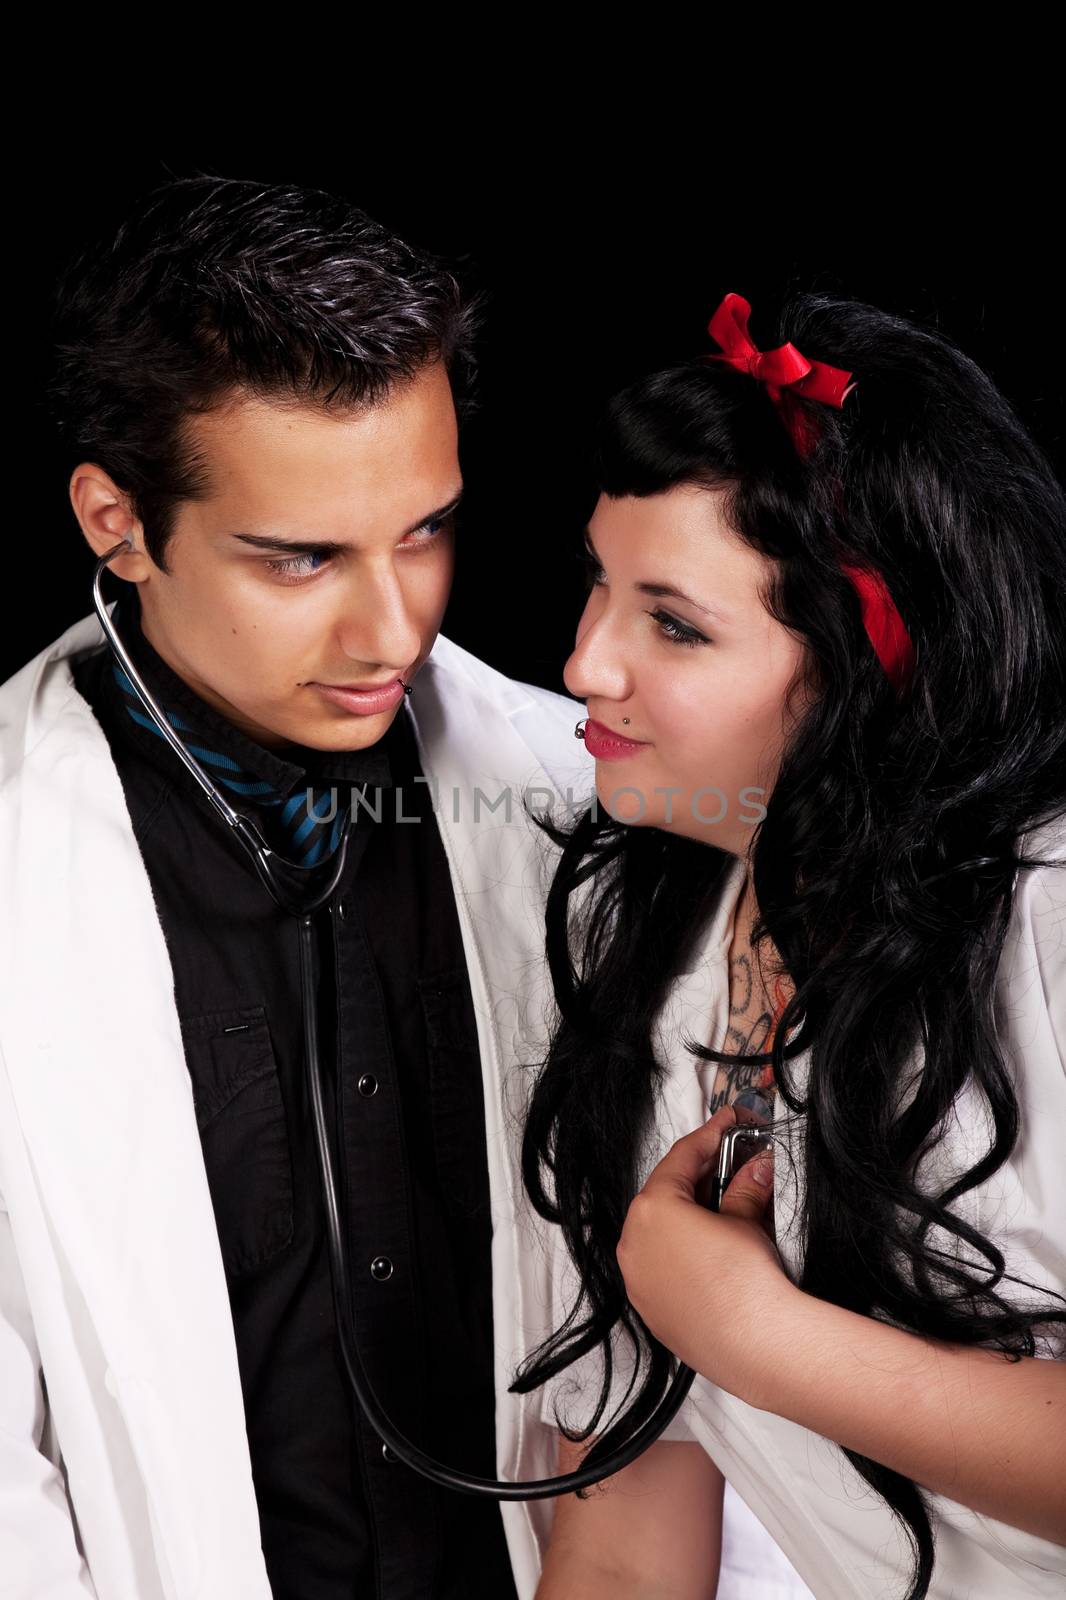  Two high school kids in a school play.  A nurse holds a stethoscope to her heart so the doctor can here her heartbeat for him. 